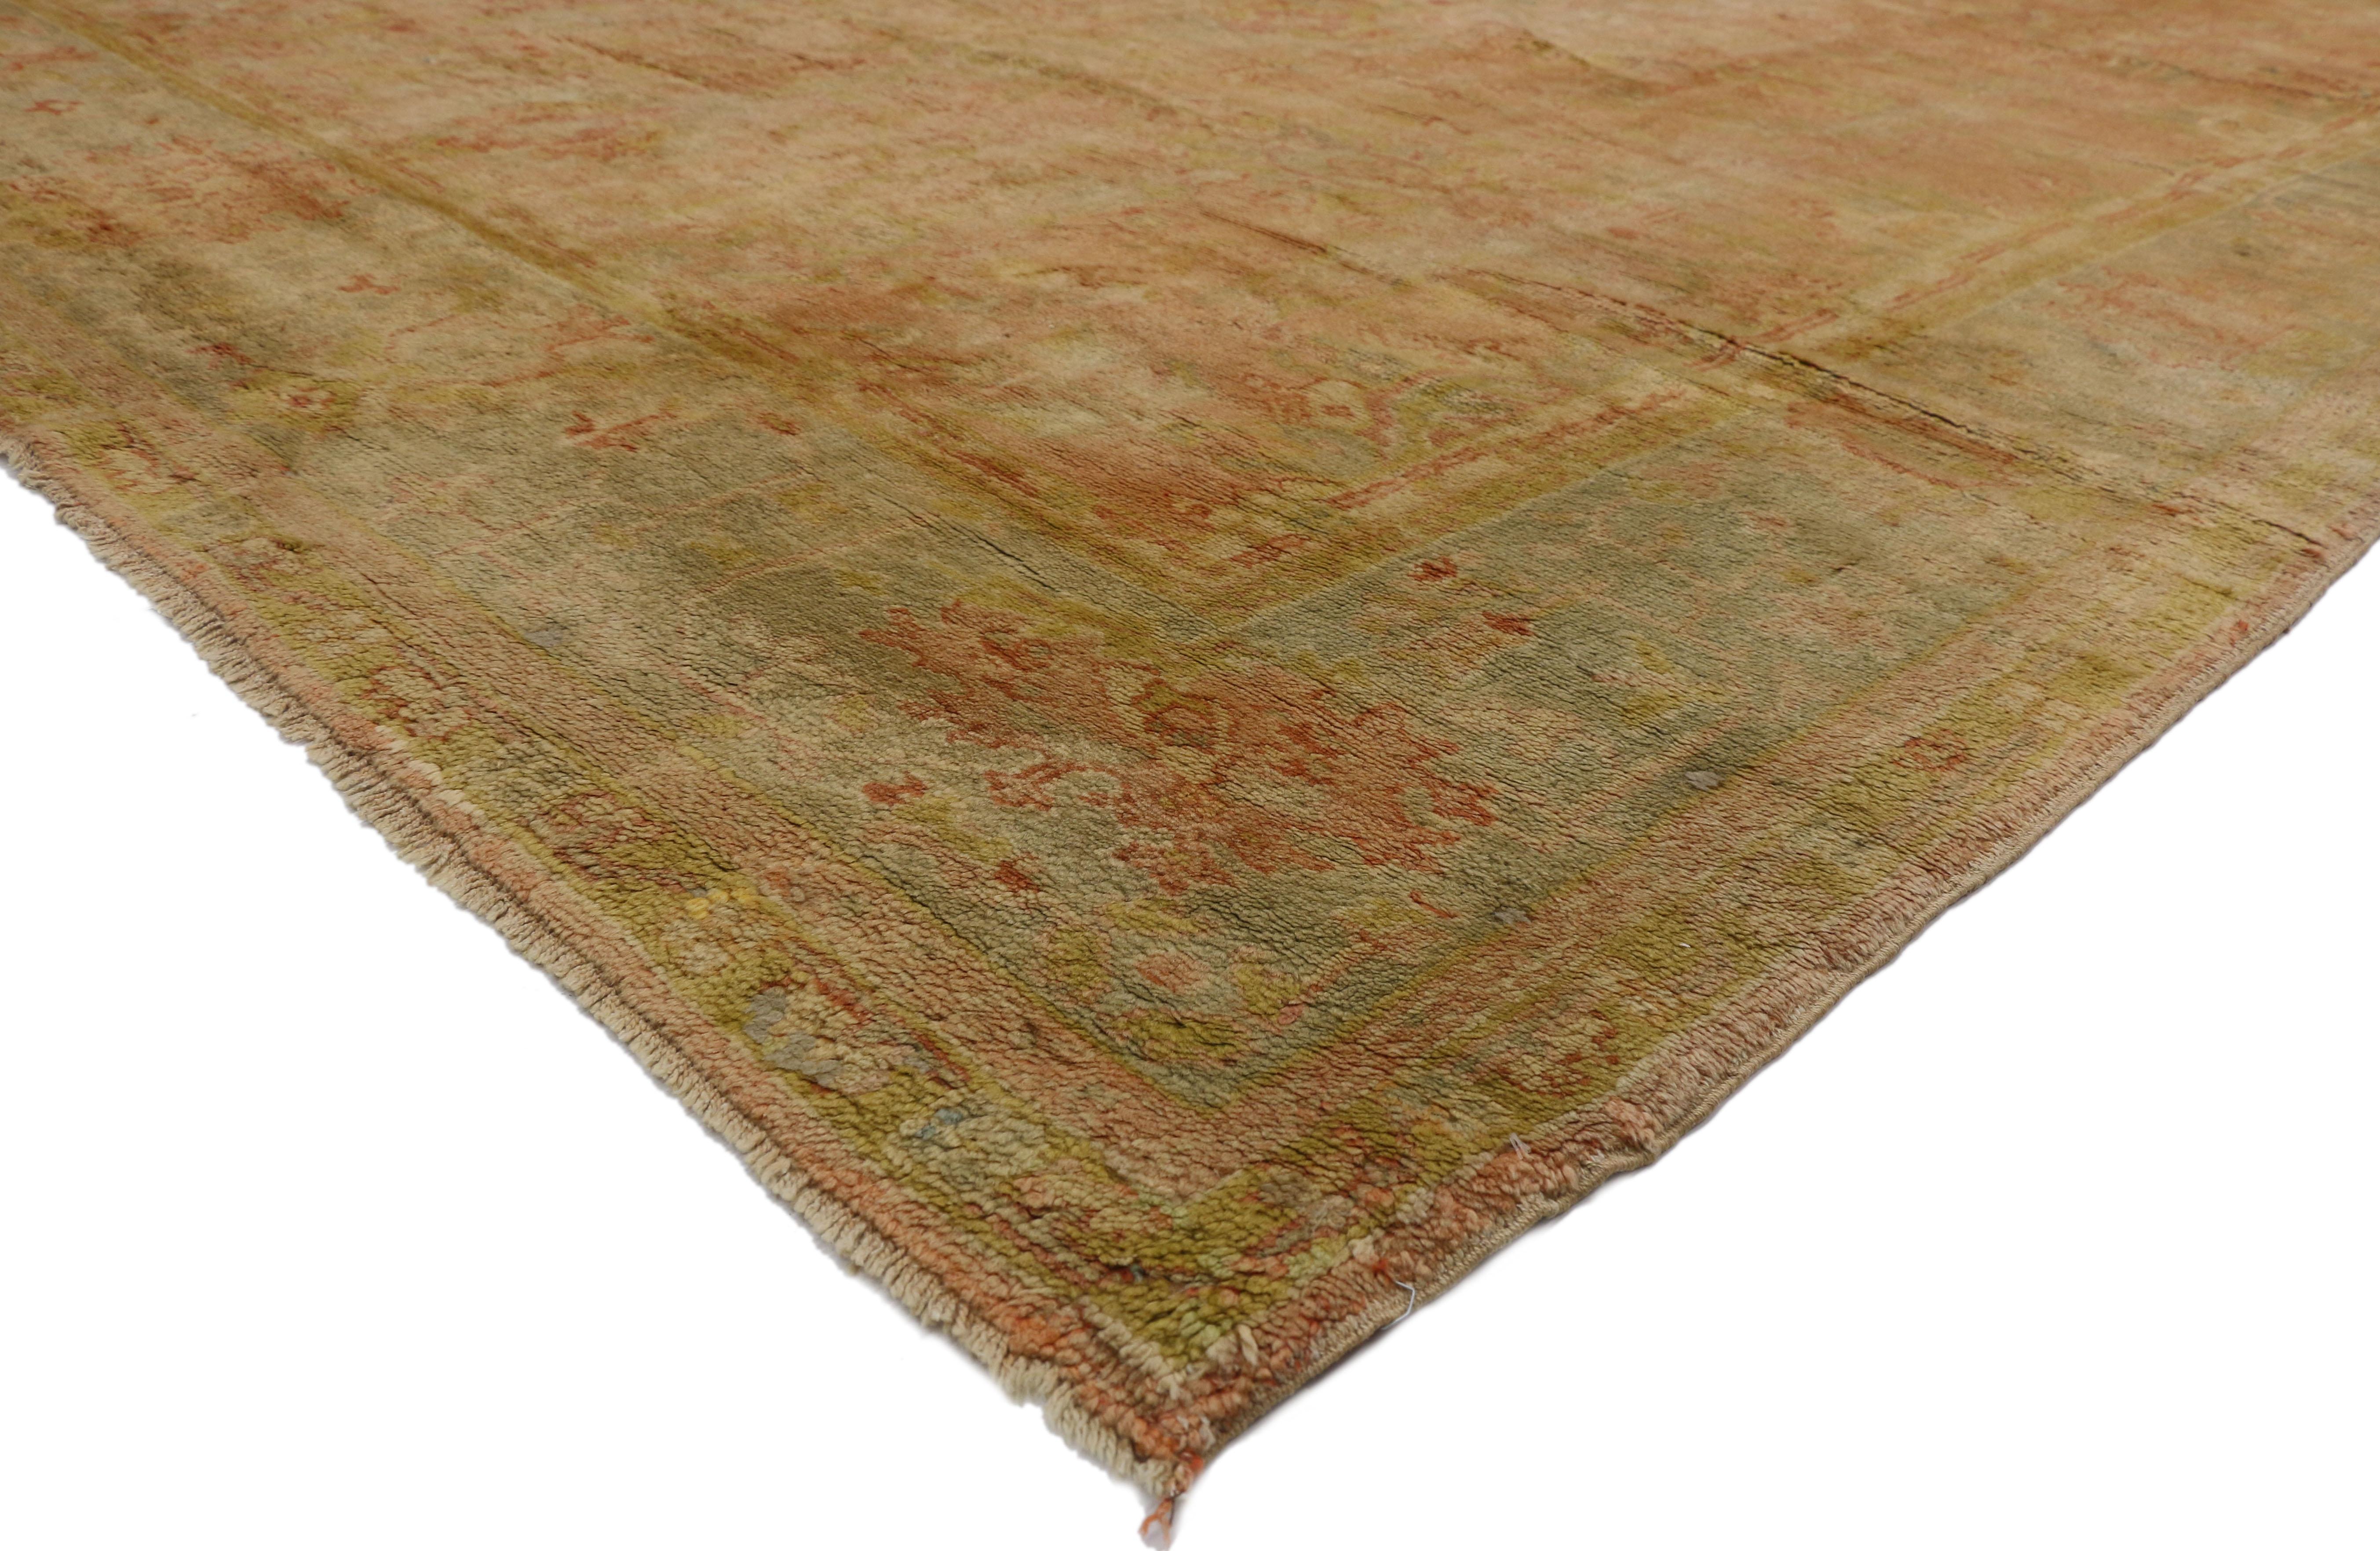 73159 Antique Turkish Oushak Rug, 10'01 x 13'09.
Spanish eclectic meets sunbaked elegance in this hand knotted wool antique Turkish Oushak rug. The intrinsic botanical design and soft spice-tone colors woven into this piece work together creating a